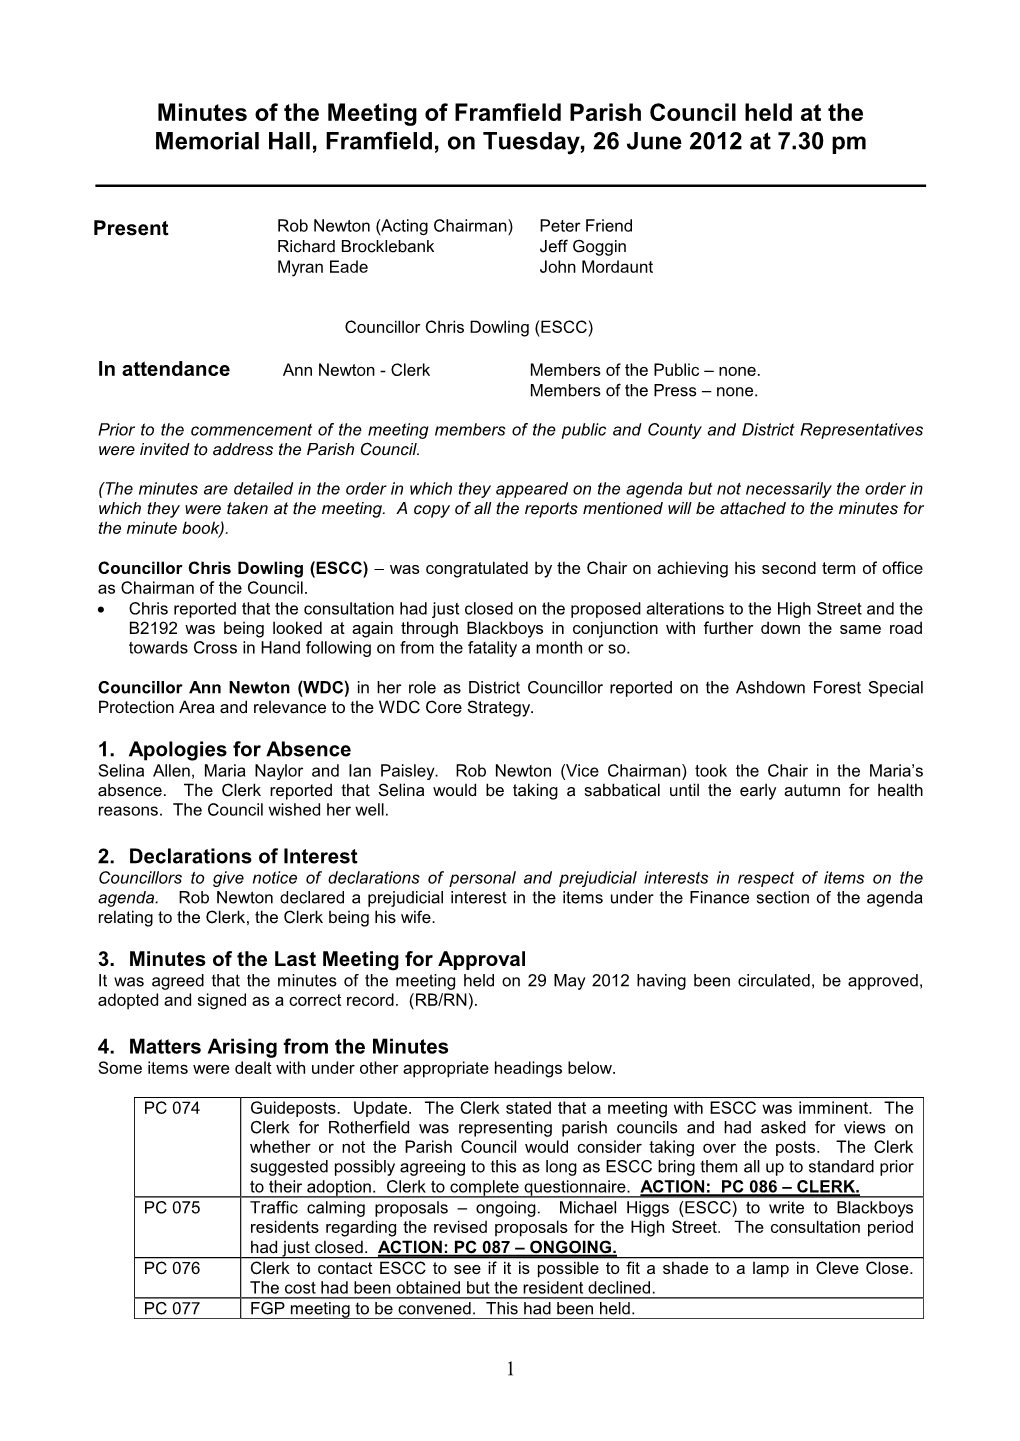 Minutes of the Meeting of the Framfield Parish Council Held